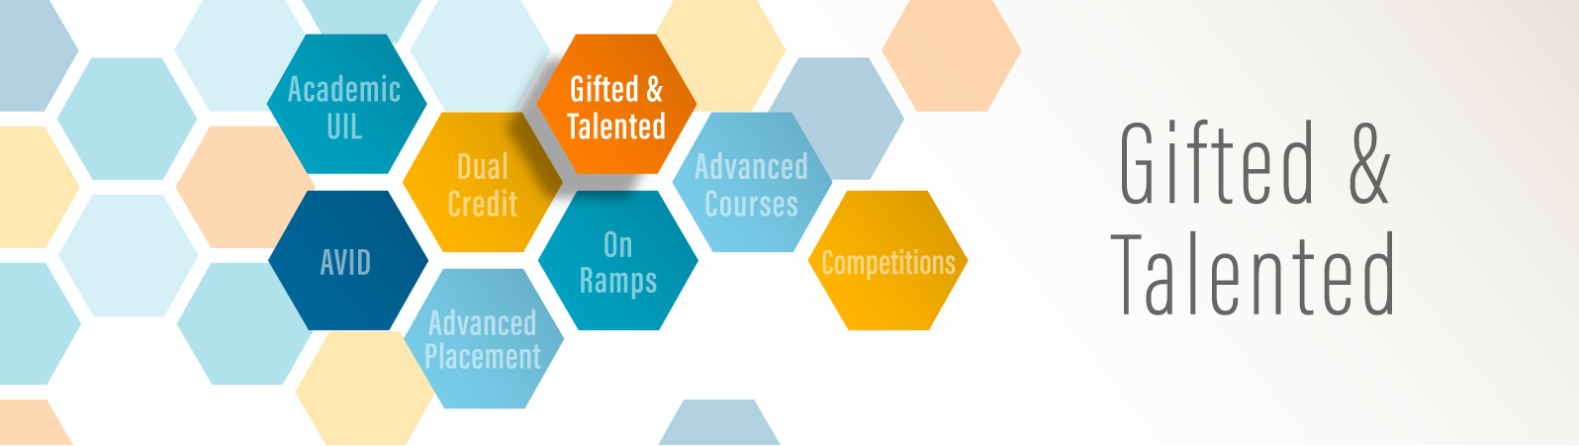 Gifted and Talented banner image